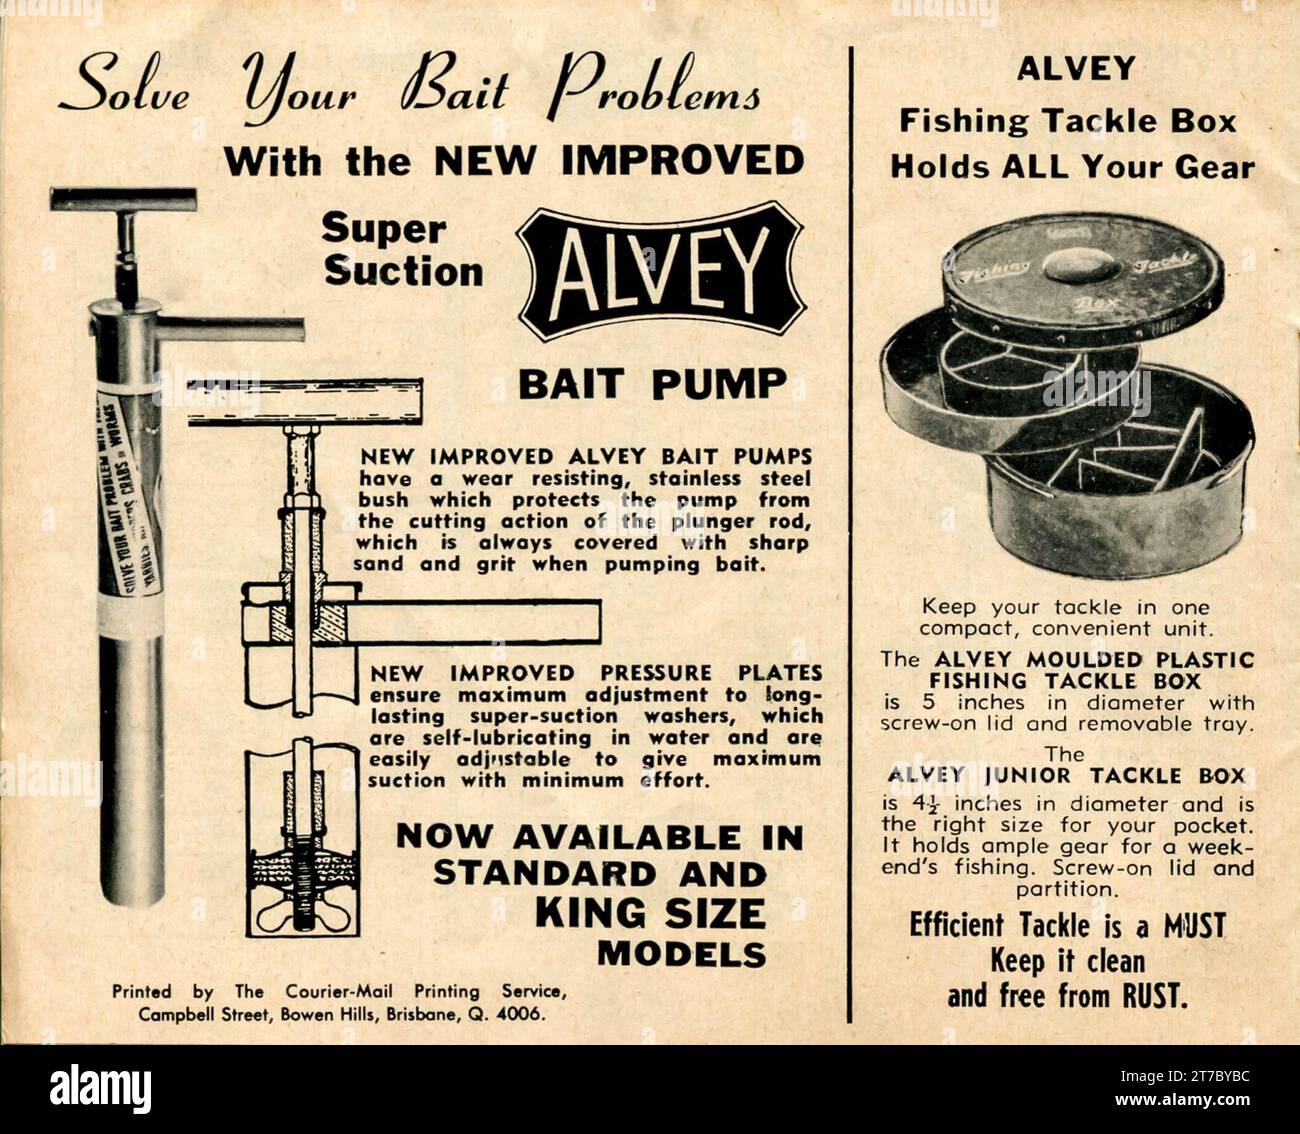 https://c8.alamy.com/comp/2T7BYBC/alvey-reels-is-an-australian-fishing-equipment-company-that-opened-in-1920-and-continues-to-operate-from-brisbane-today-2T7BYBC.jpg